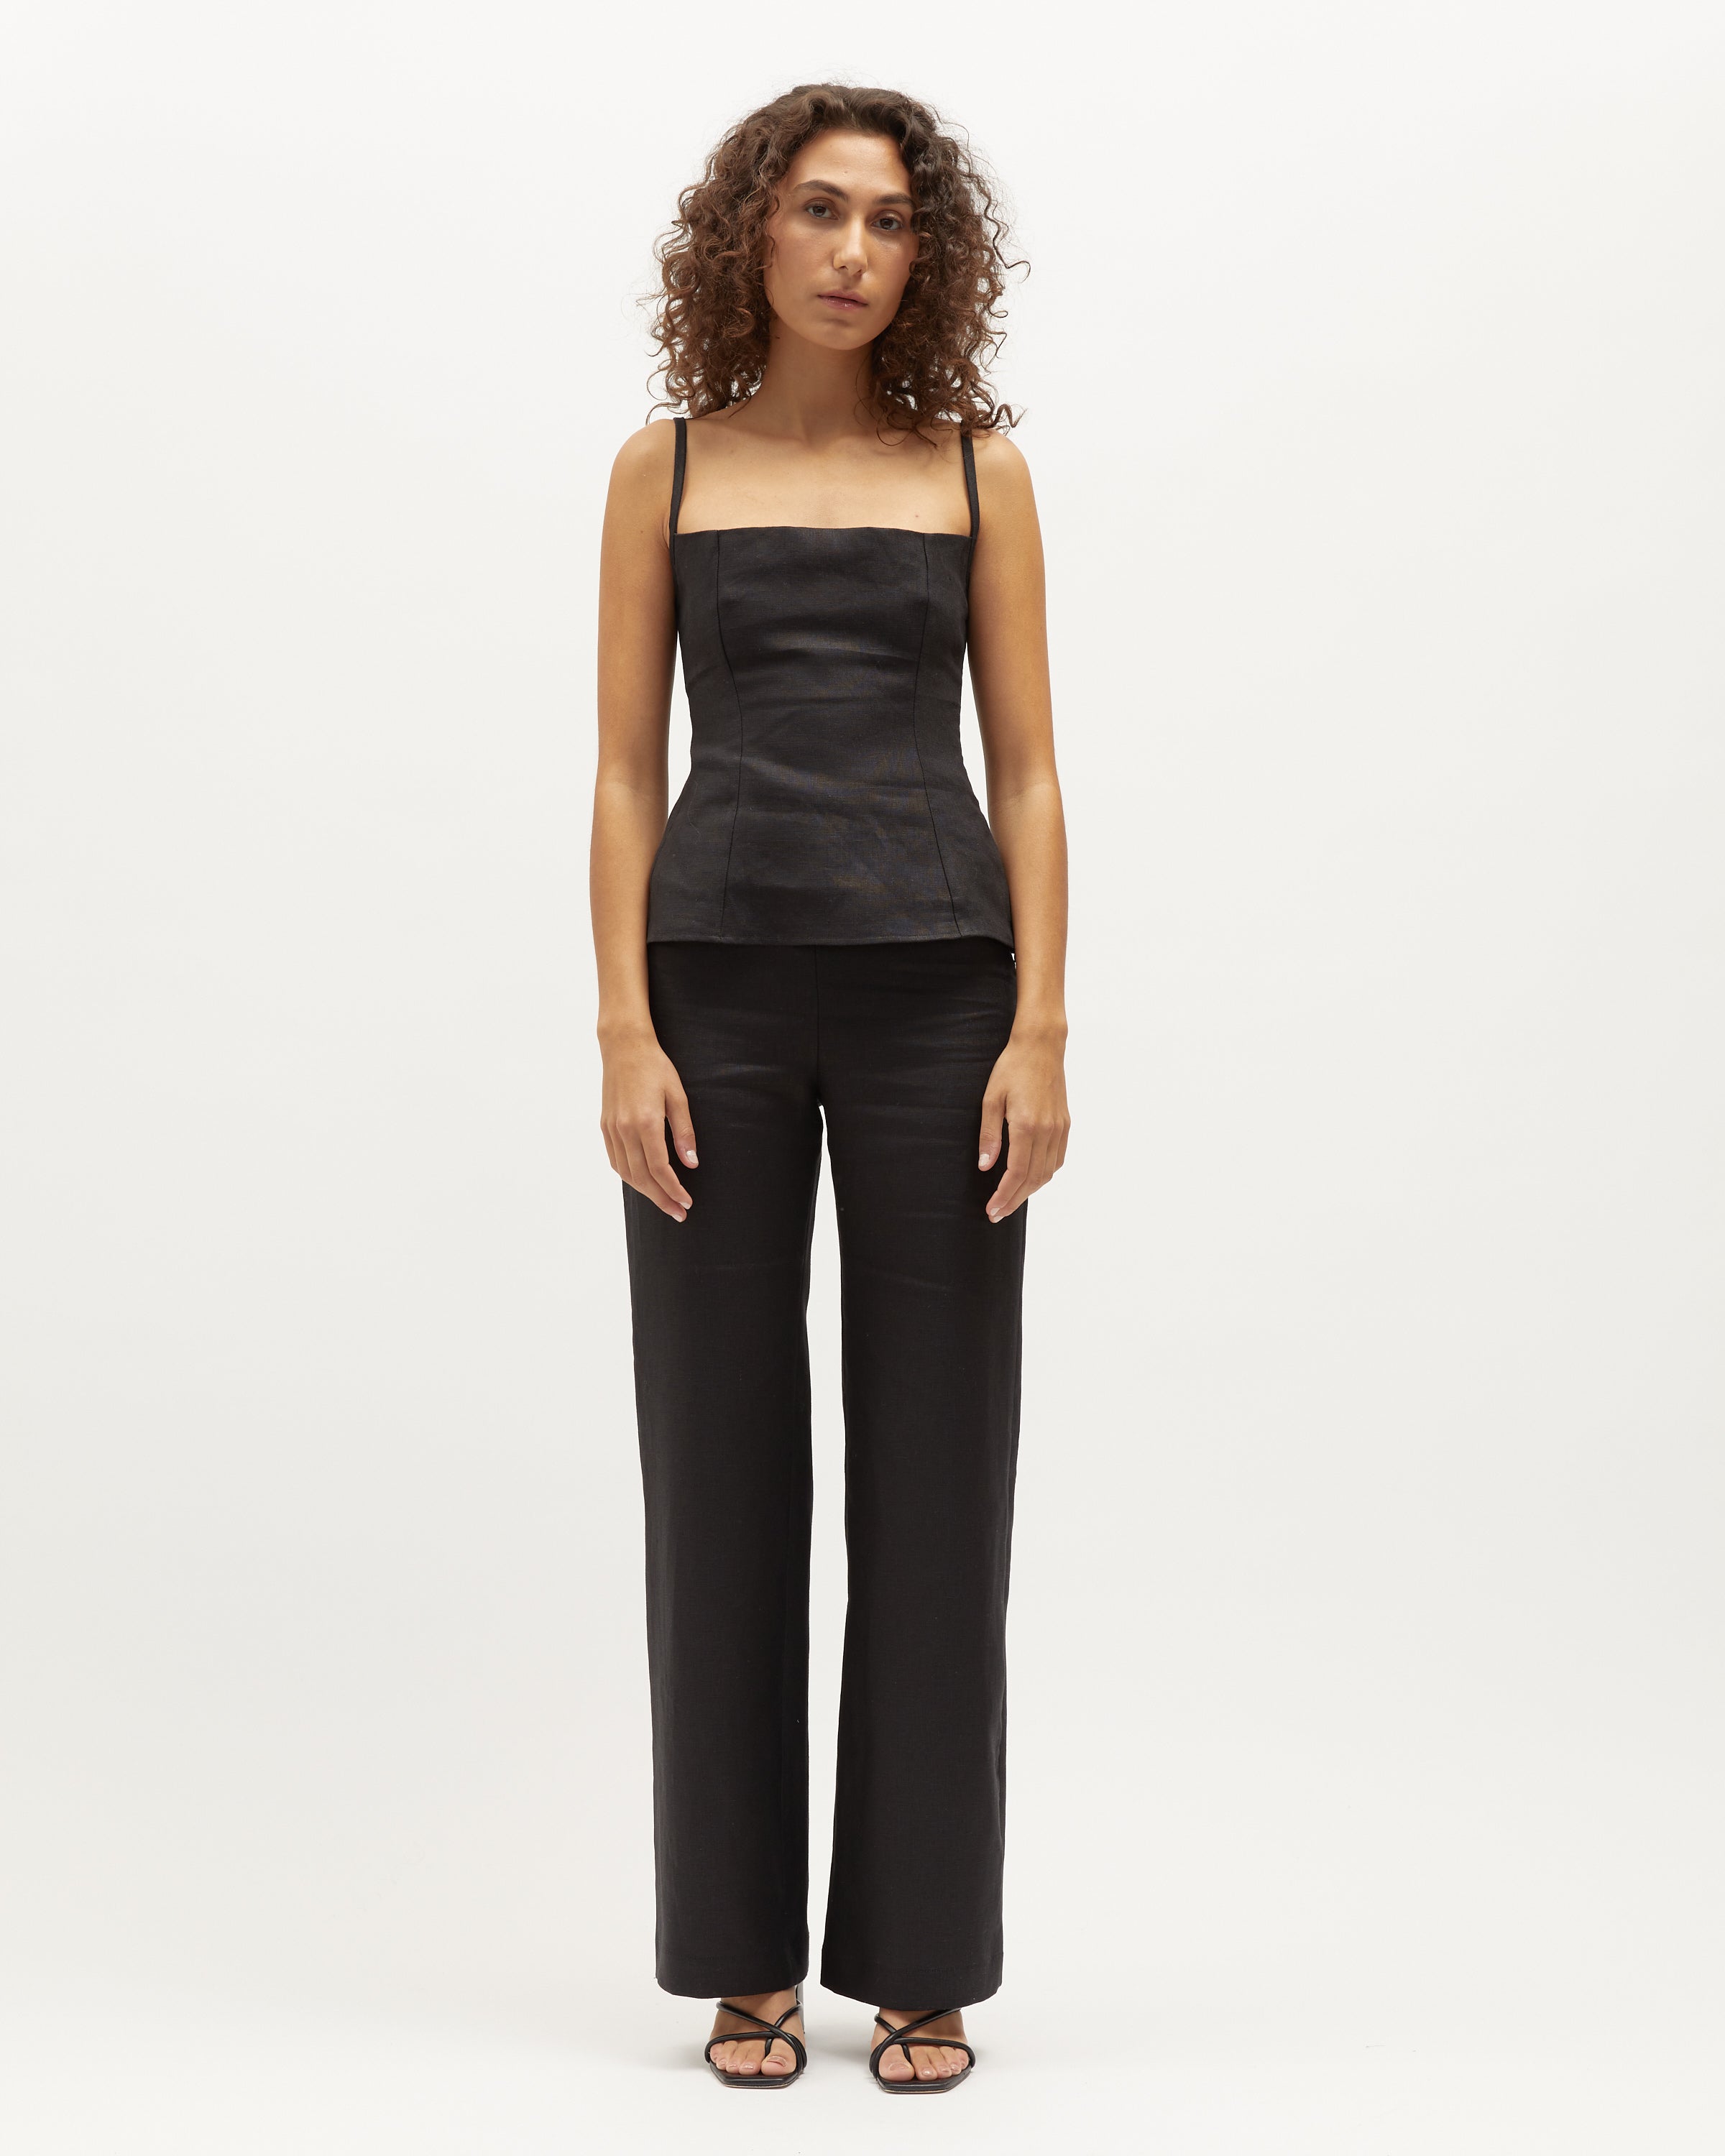 Sonia Pant | Black Heavy-Weight Linen $280